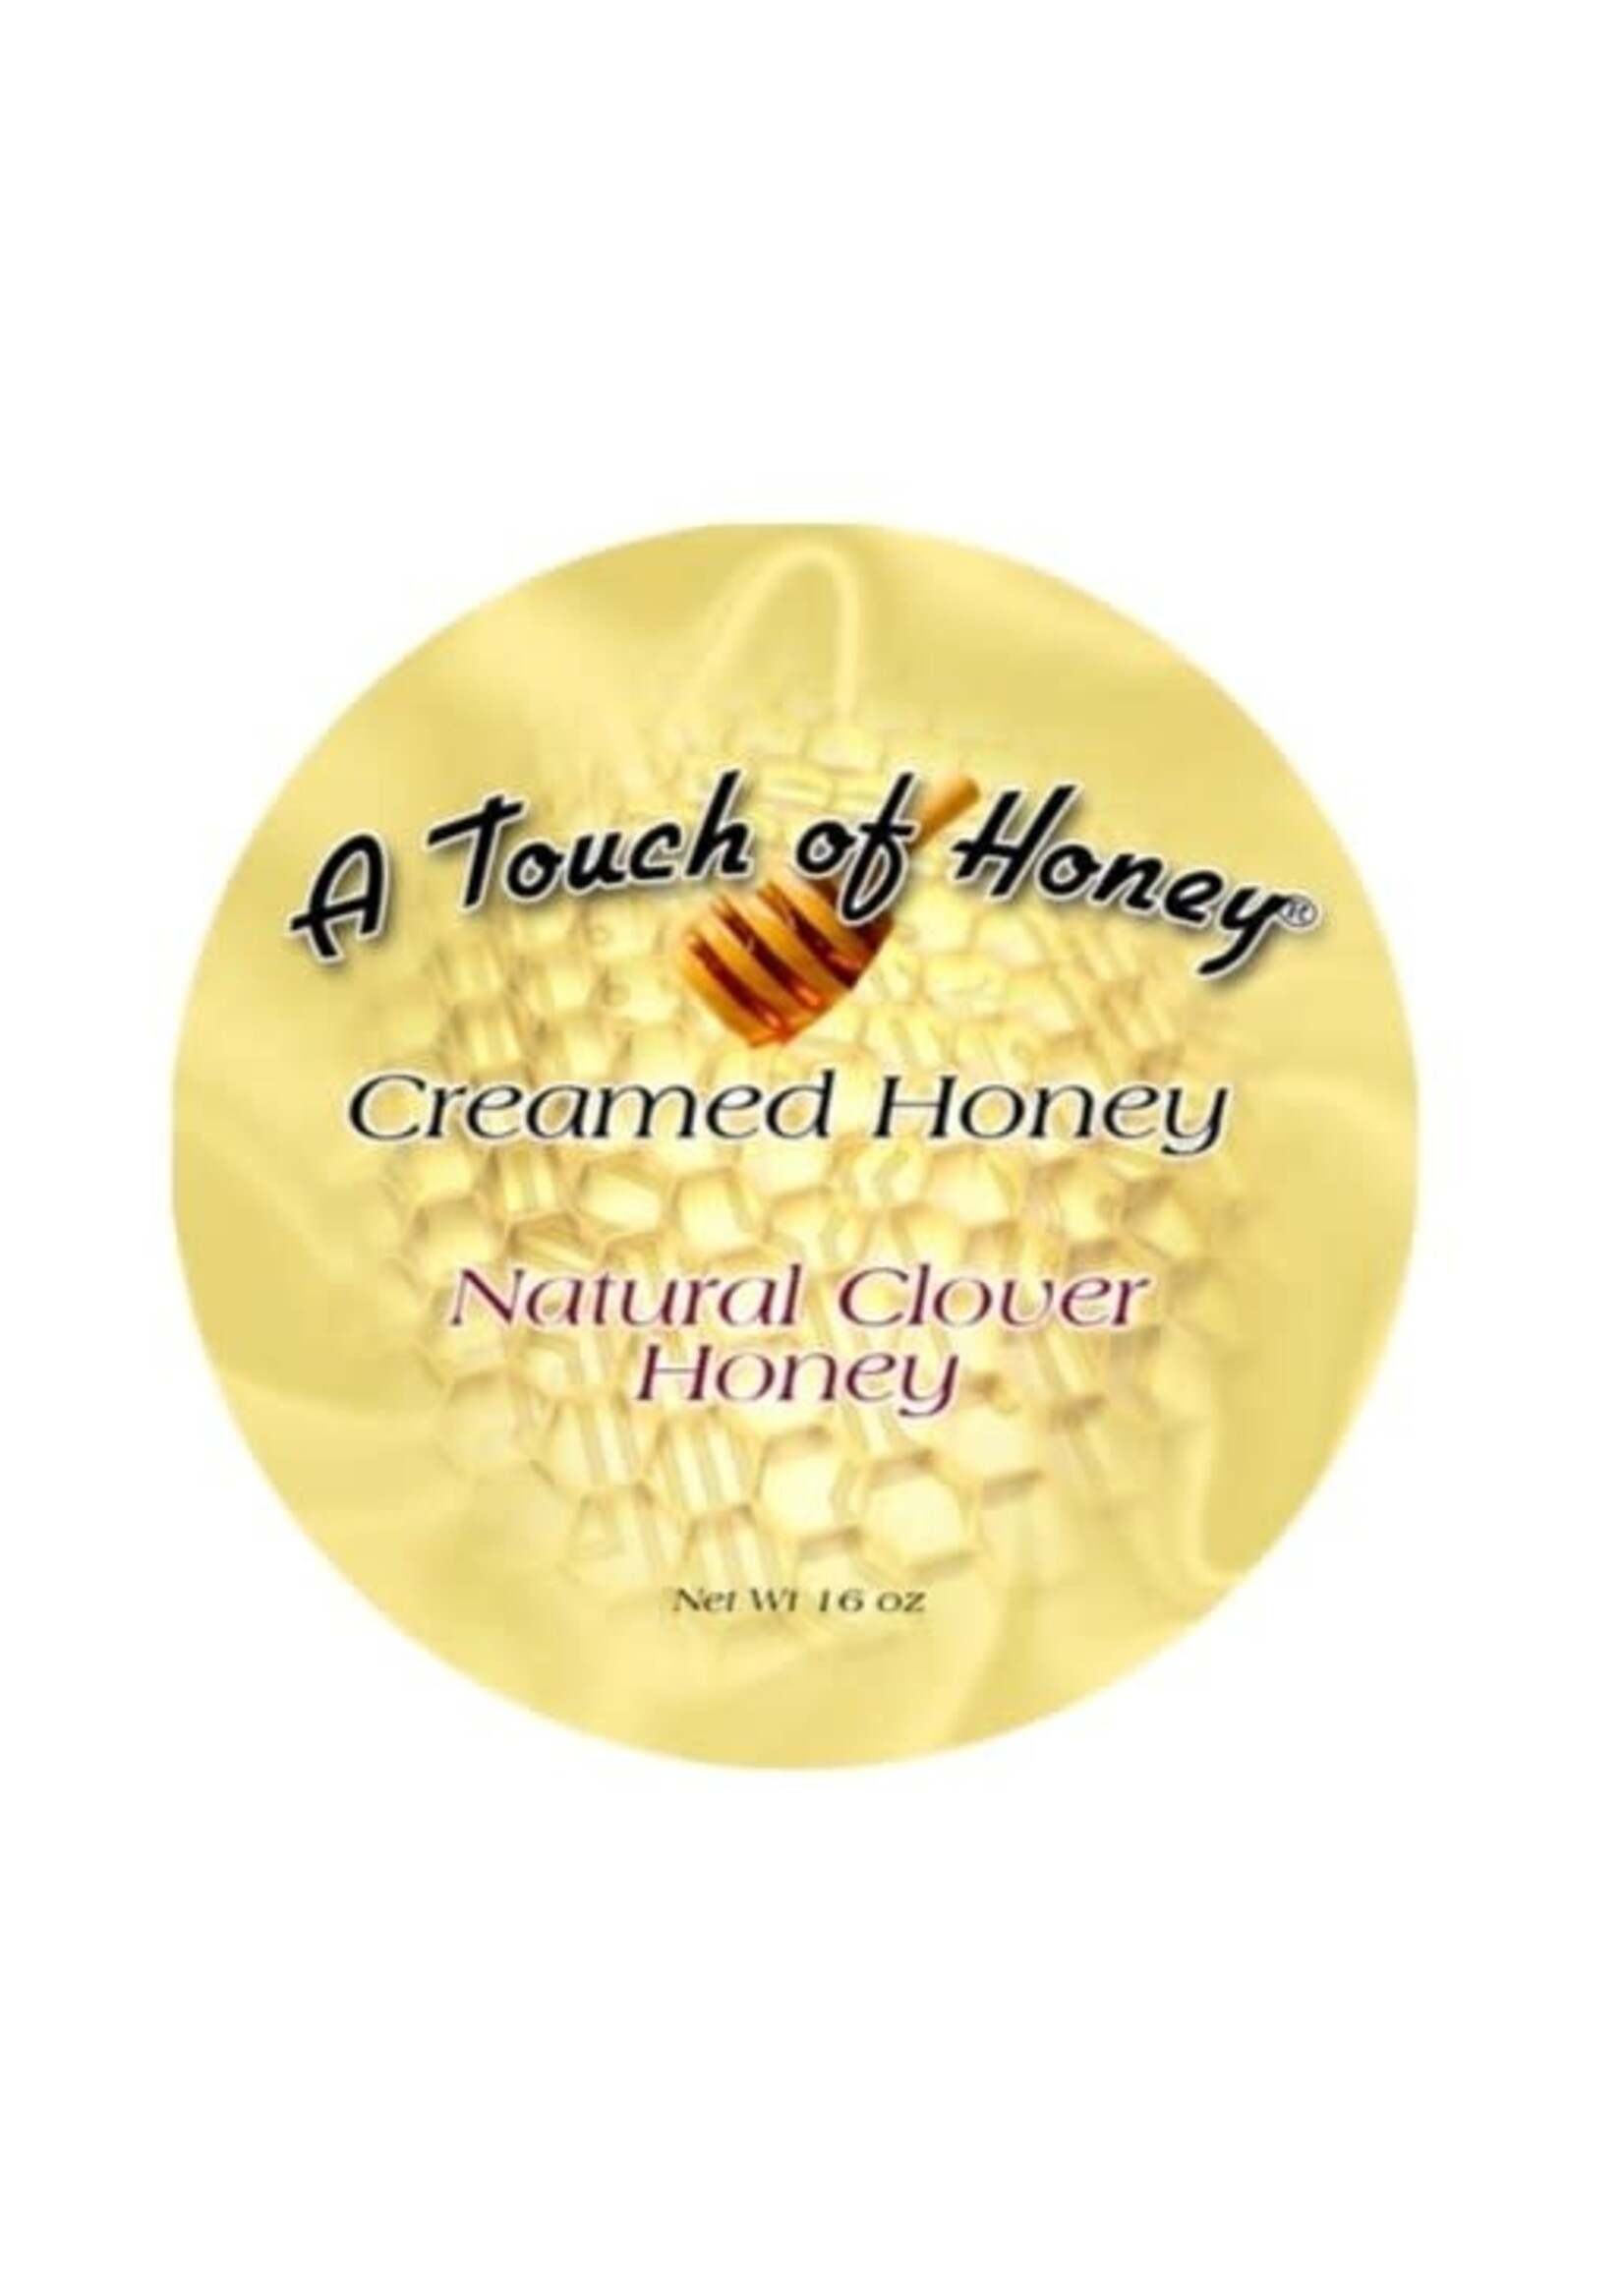 A Touch of Honey Natural Clover Creamed Honey